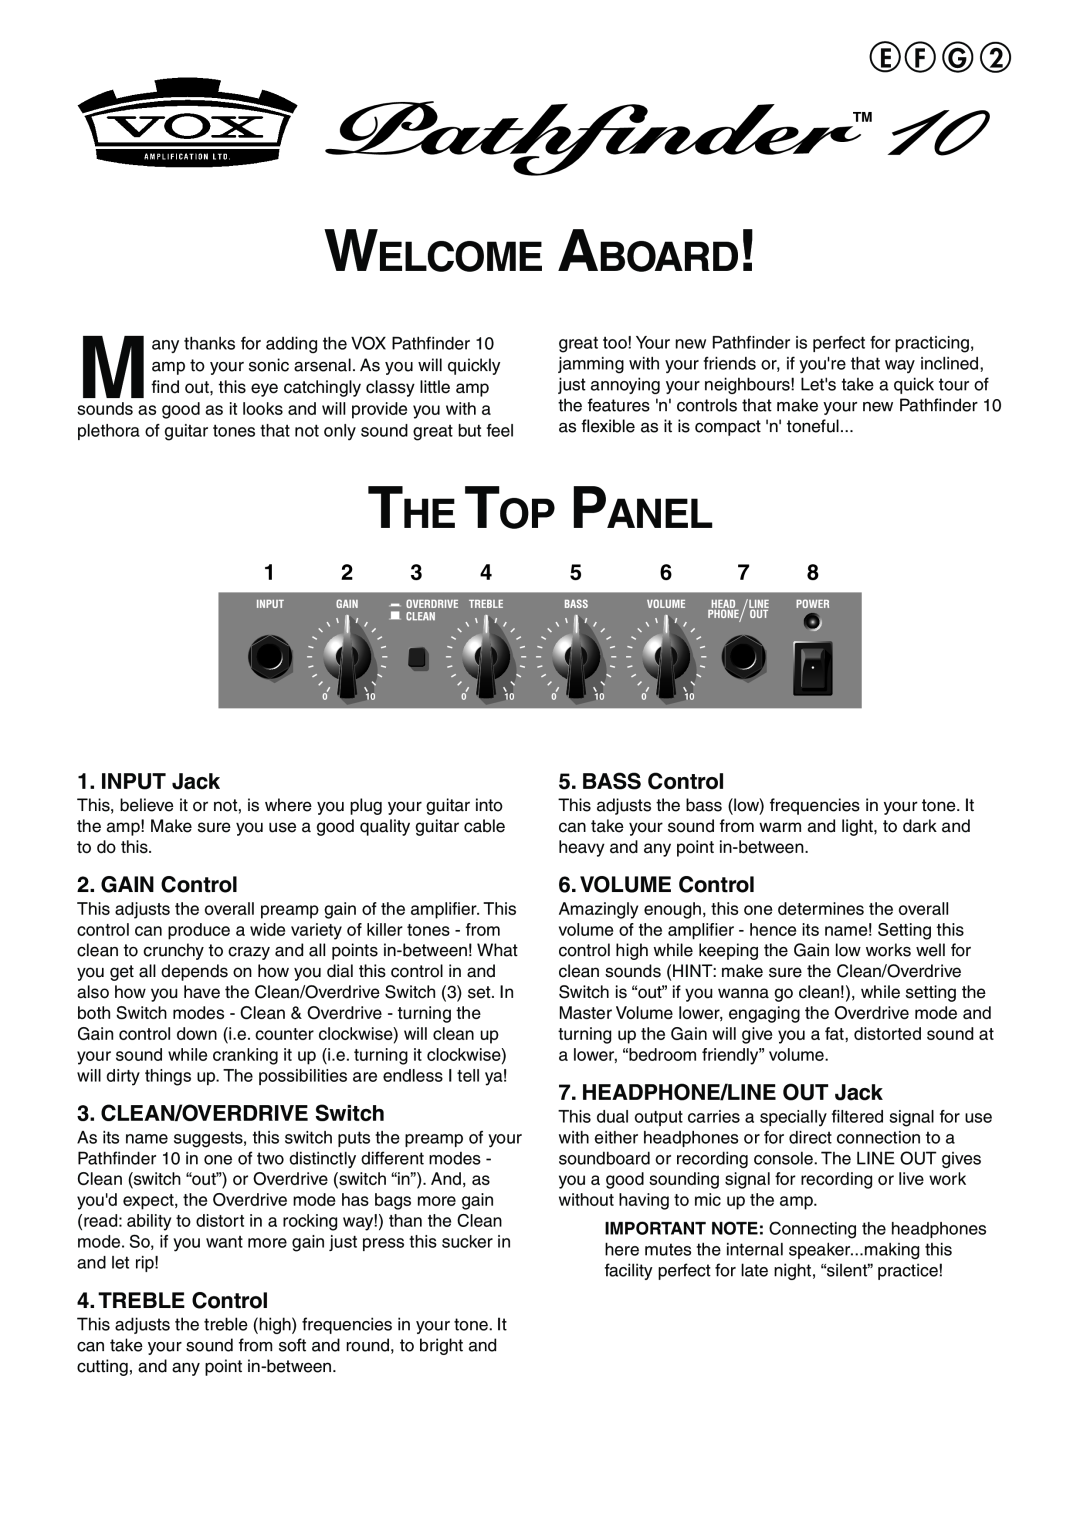 Vox 10 manual Welcome Aboard, The Top Panel, E F G 